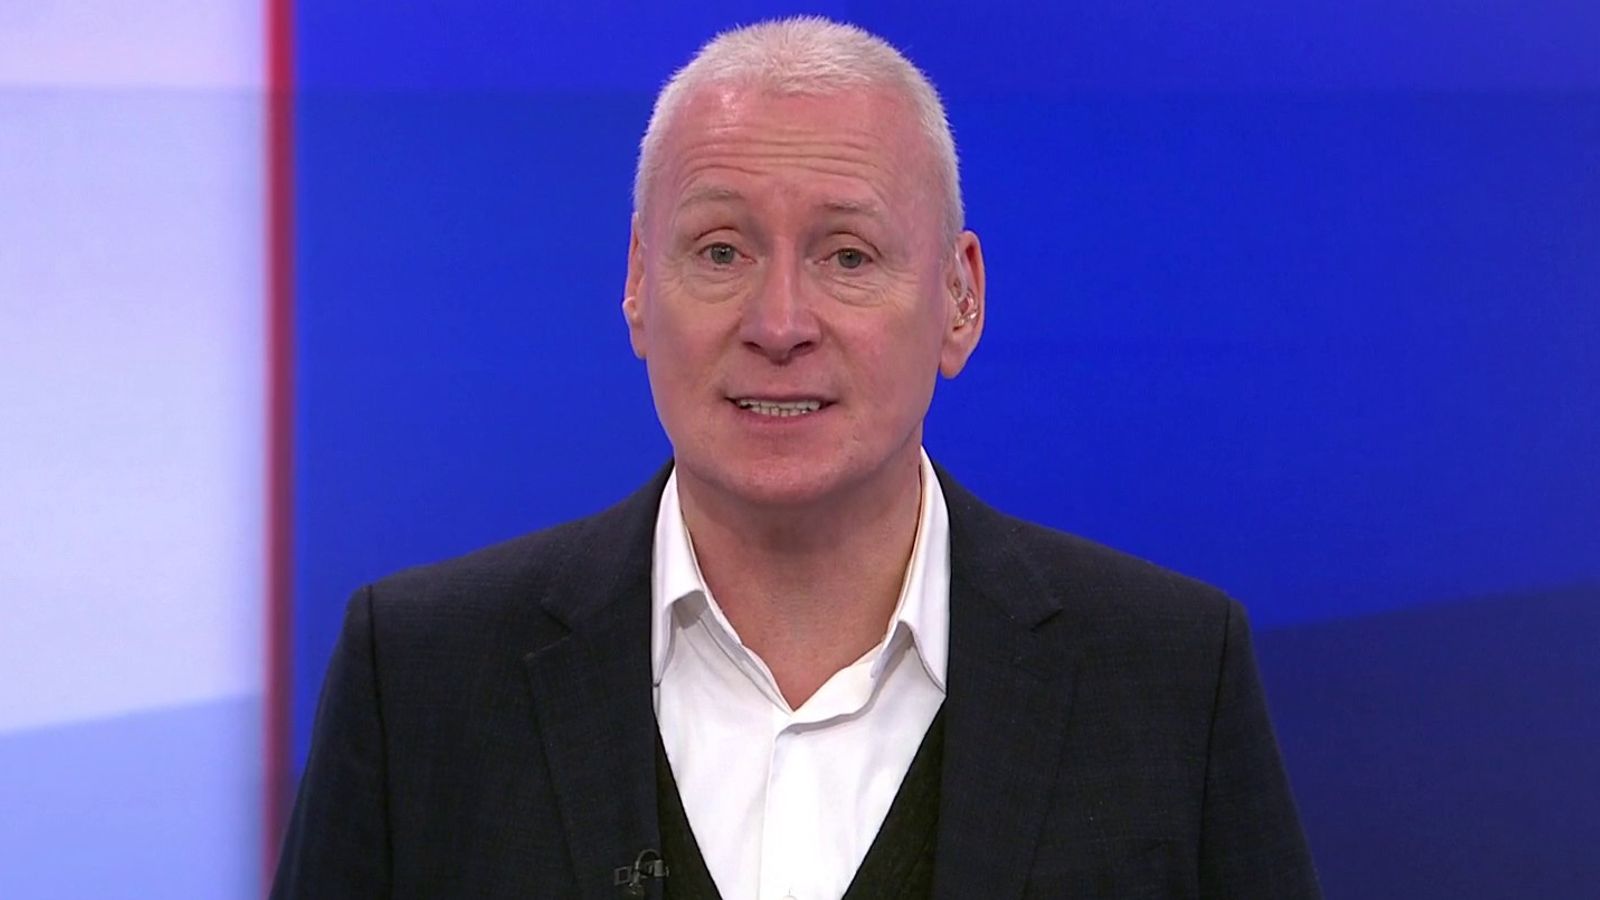 Jim White leaves Sky Sports News after 23 years | Football News | Sky Sports